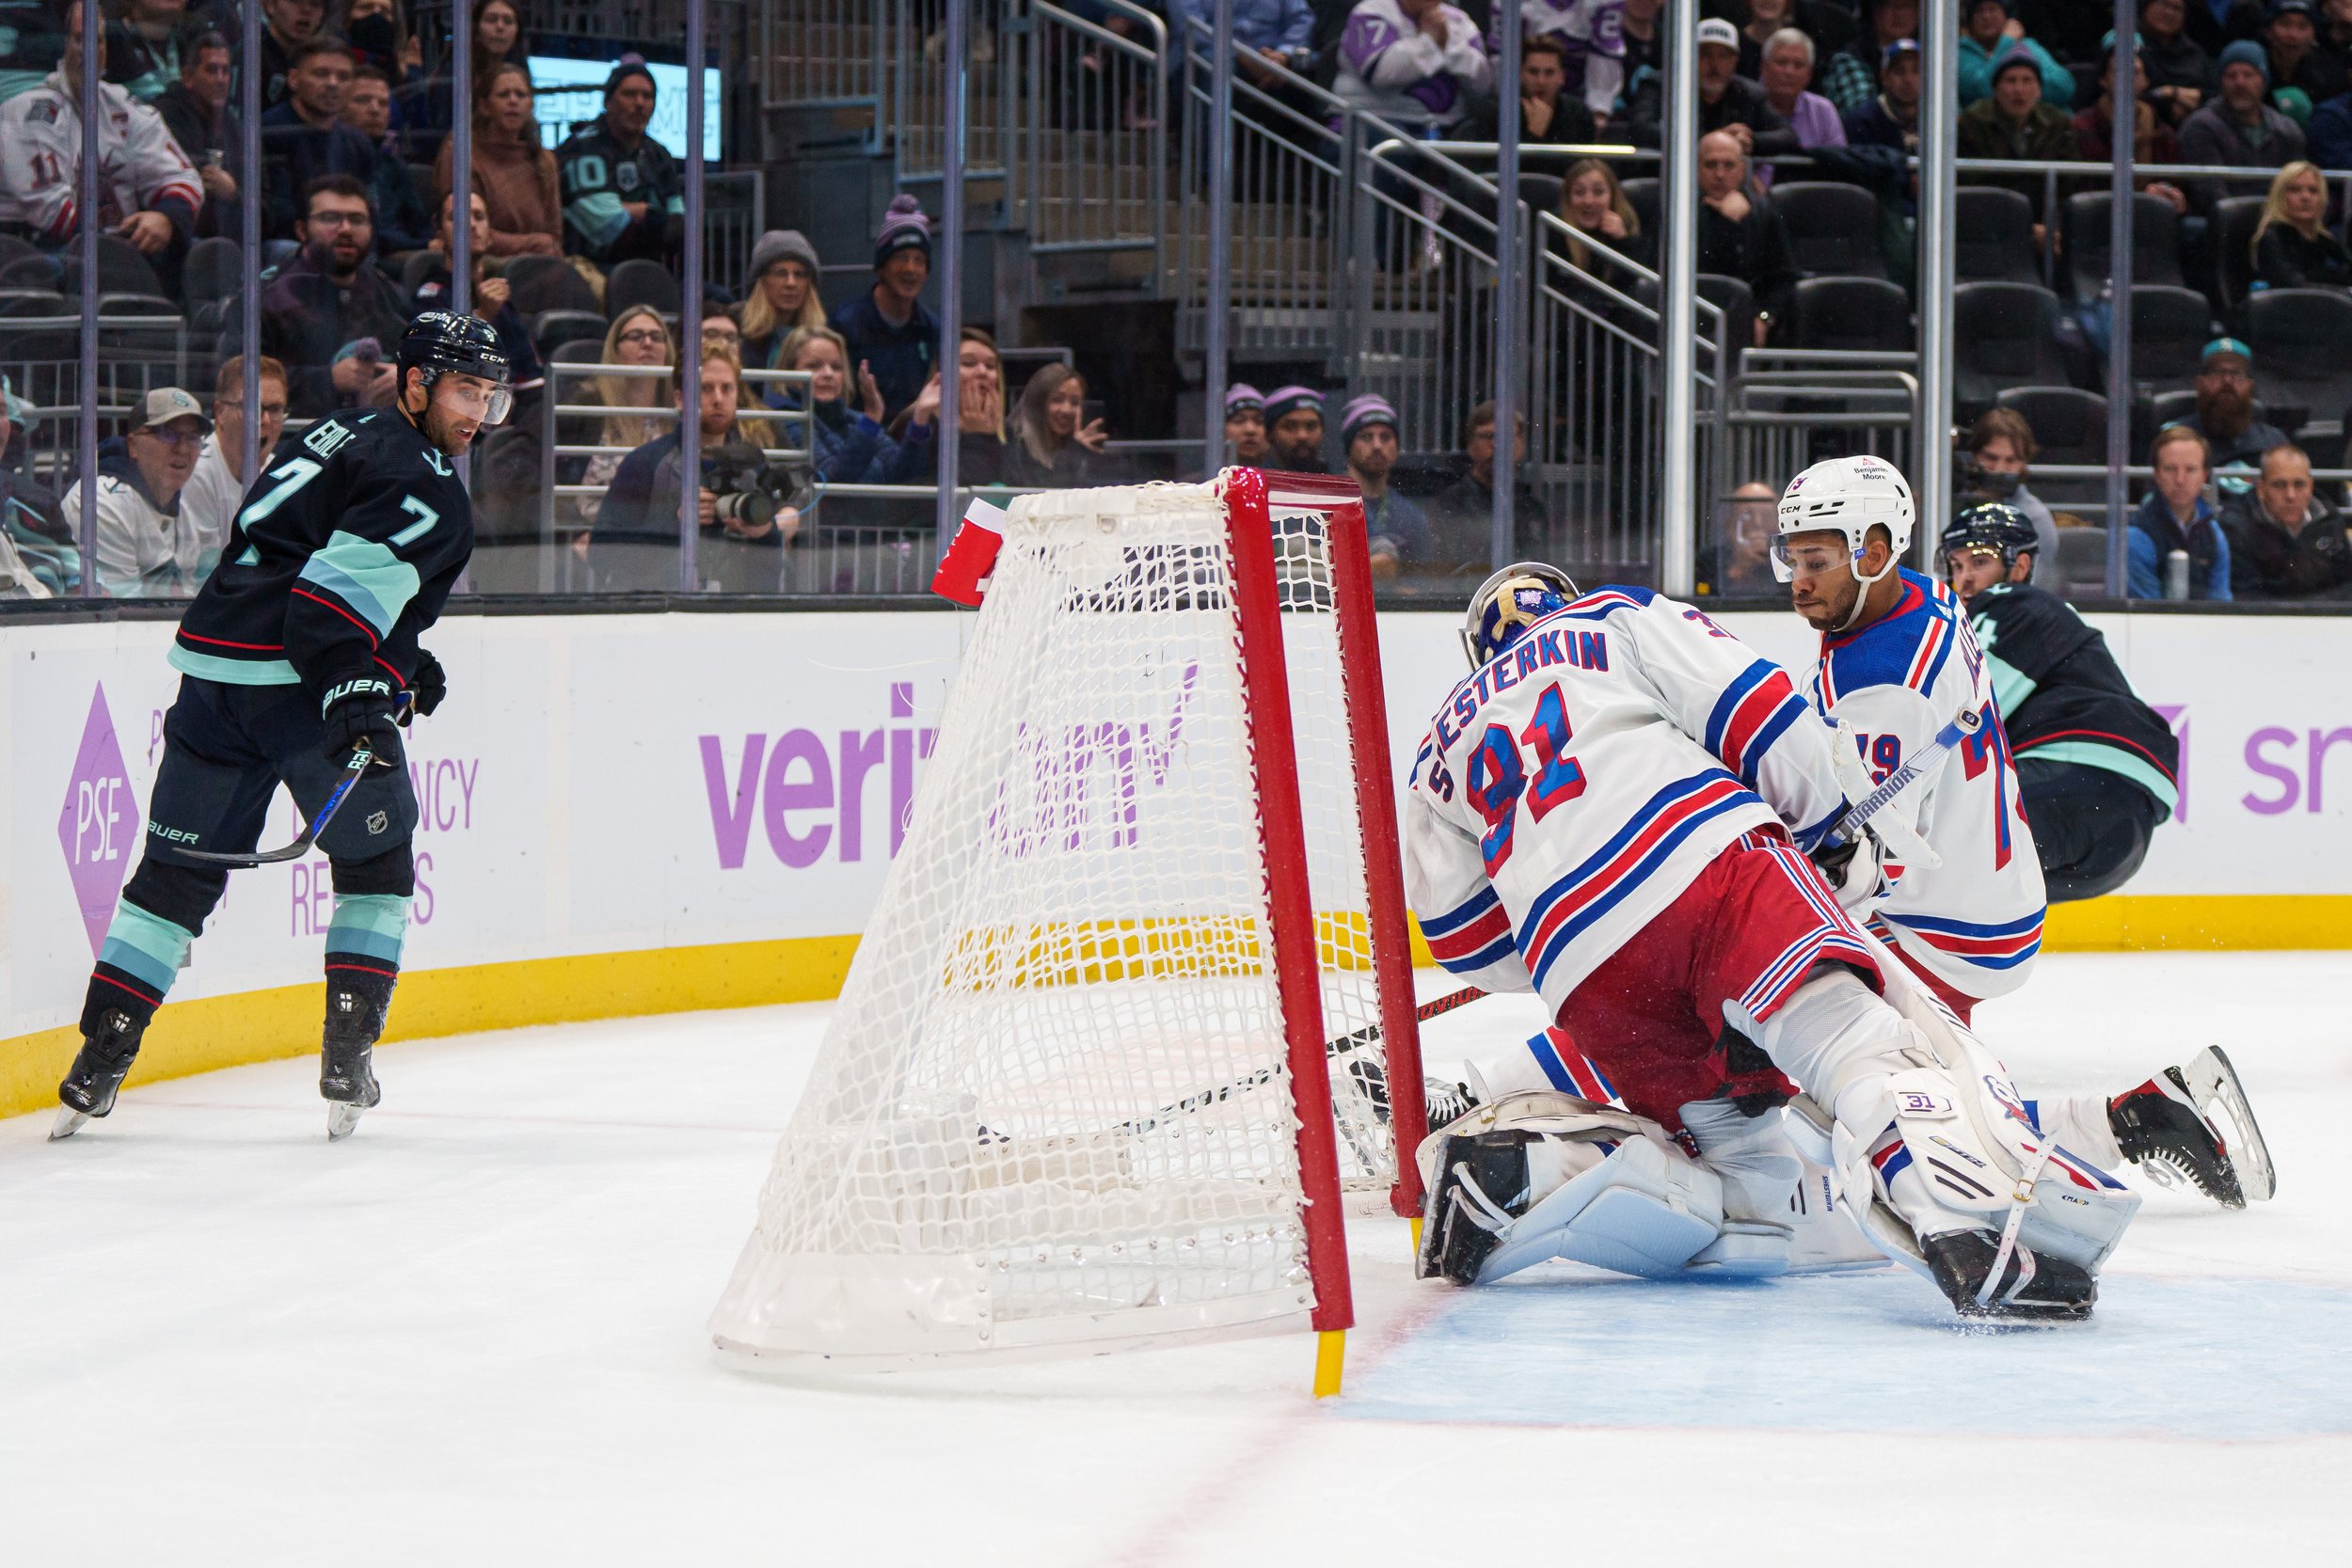 After lighting delay, Kraken can't fix on-ice issues in loss to Rangers